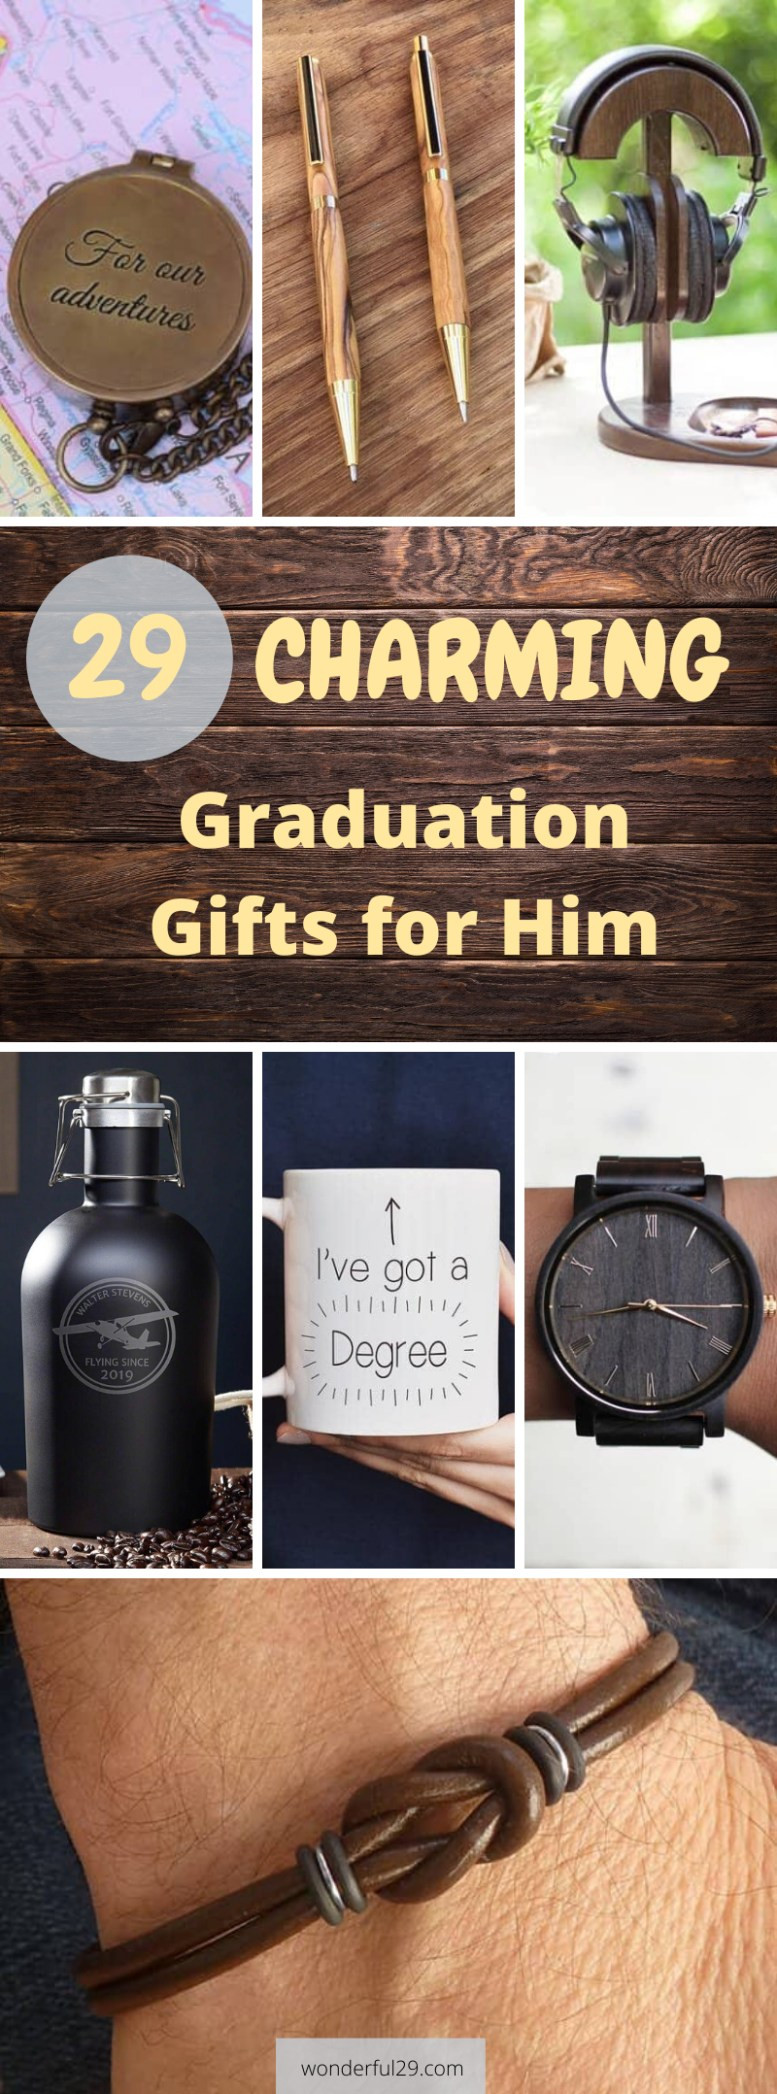 Graduation Gift Ideas For Him
 29 Best Graduation Gift Ideas for Him in 2020